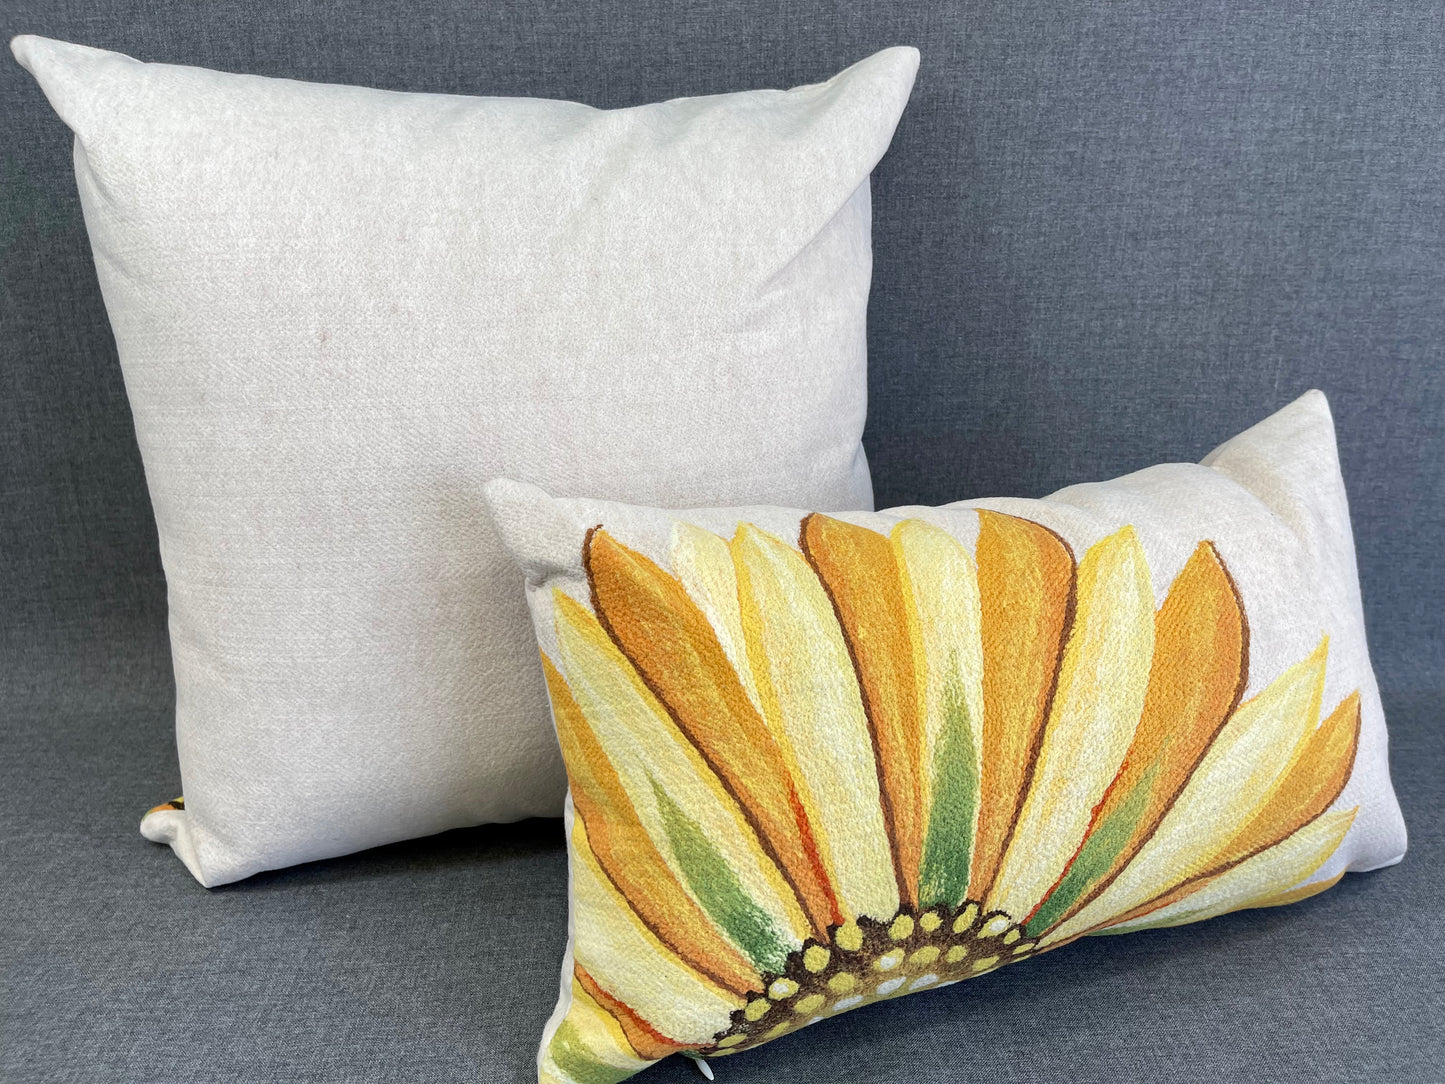 Luxury Outdoor Lumbar Pillow - 18" x 10" - Sunflower Fields; A Large Sunflower on a burlap colored background